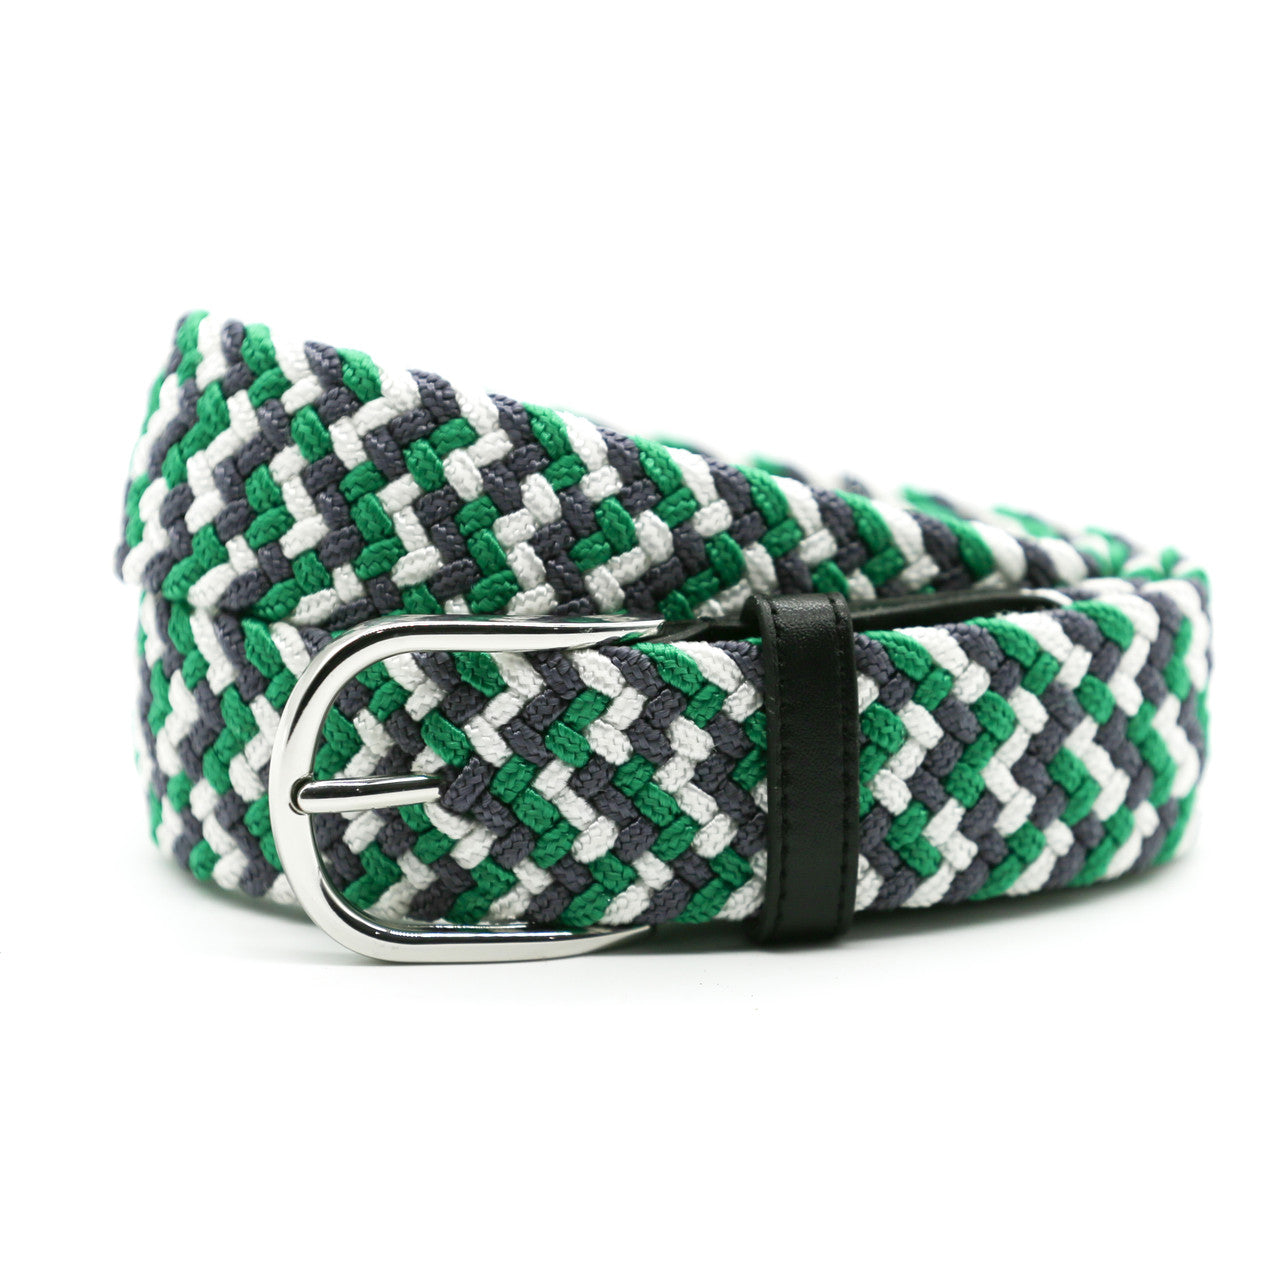 Belt - Green, Grey and White